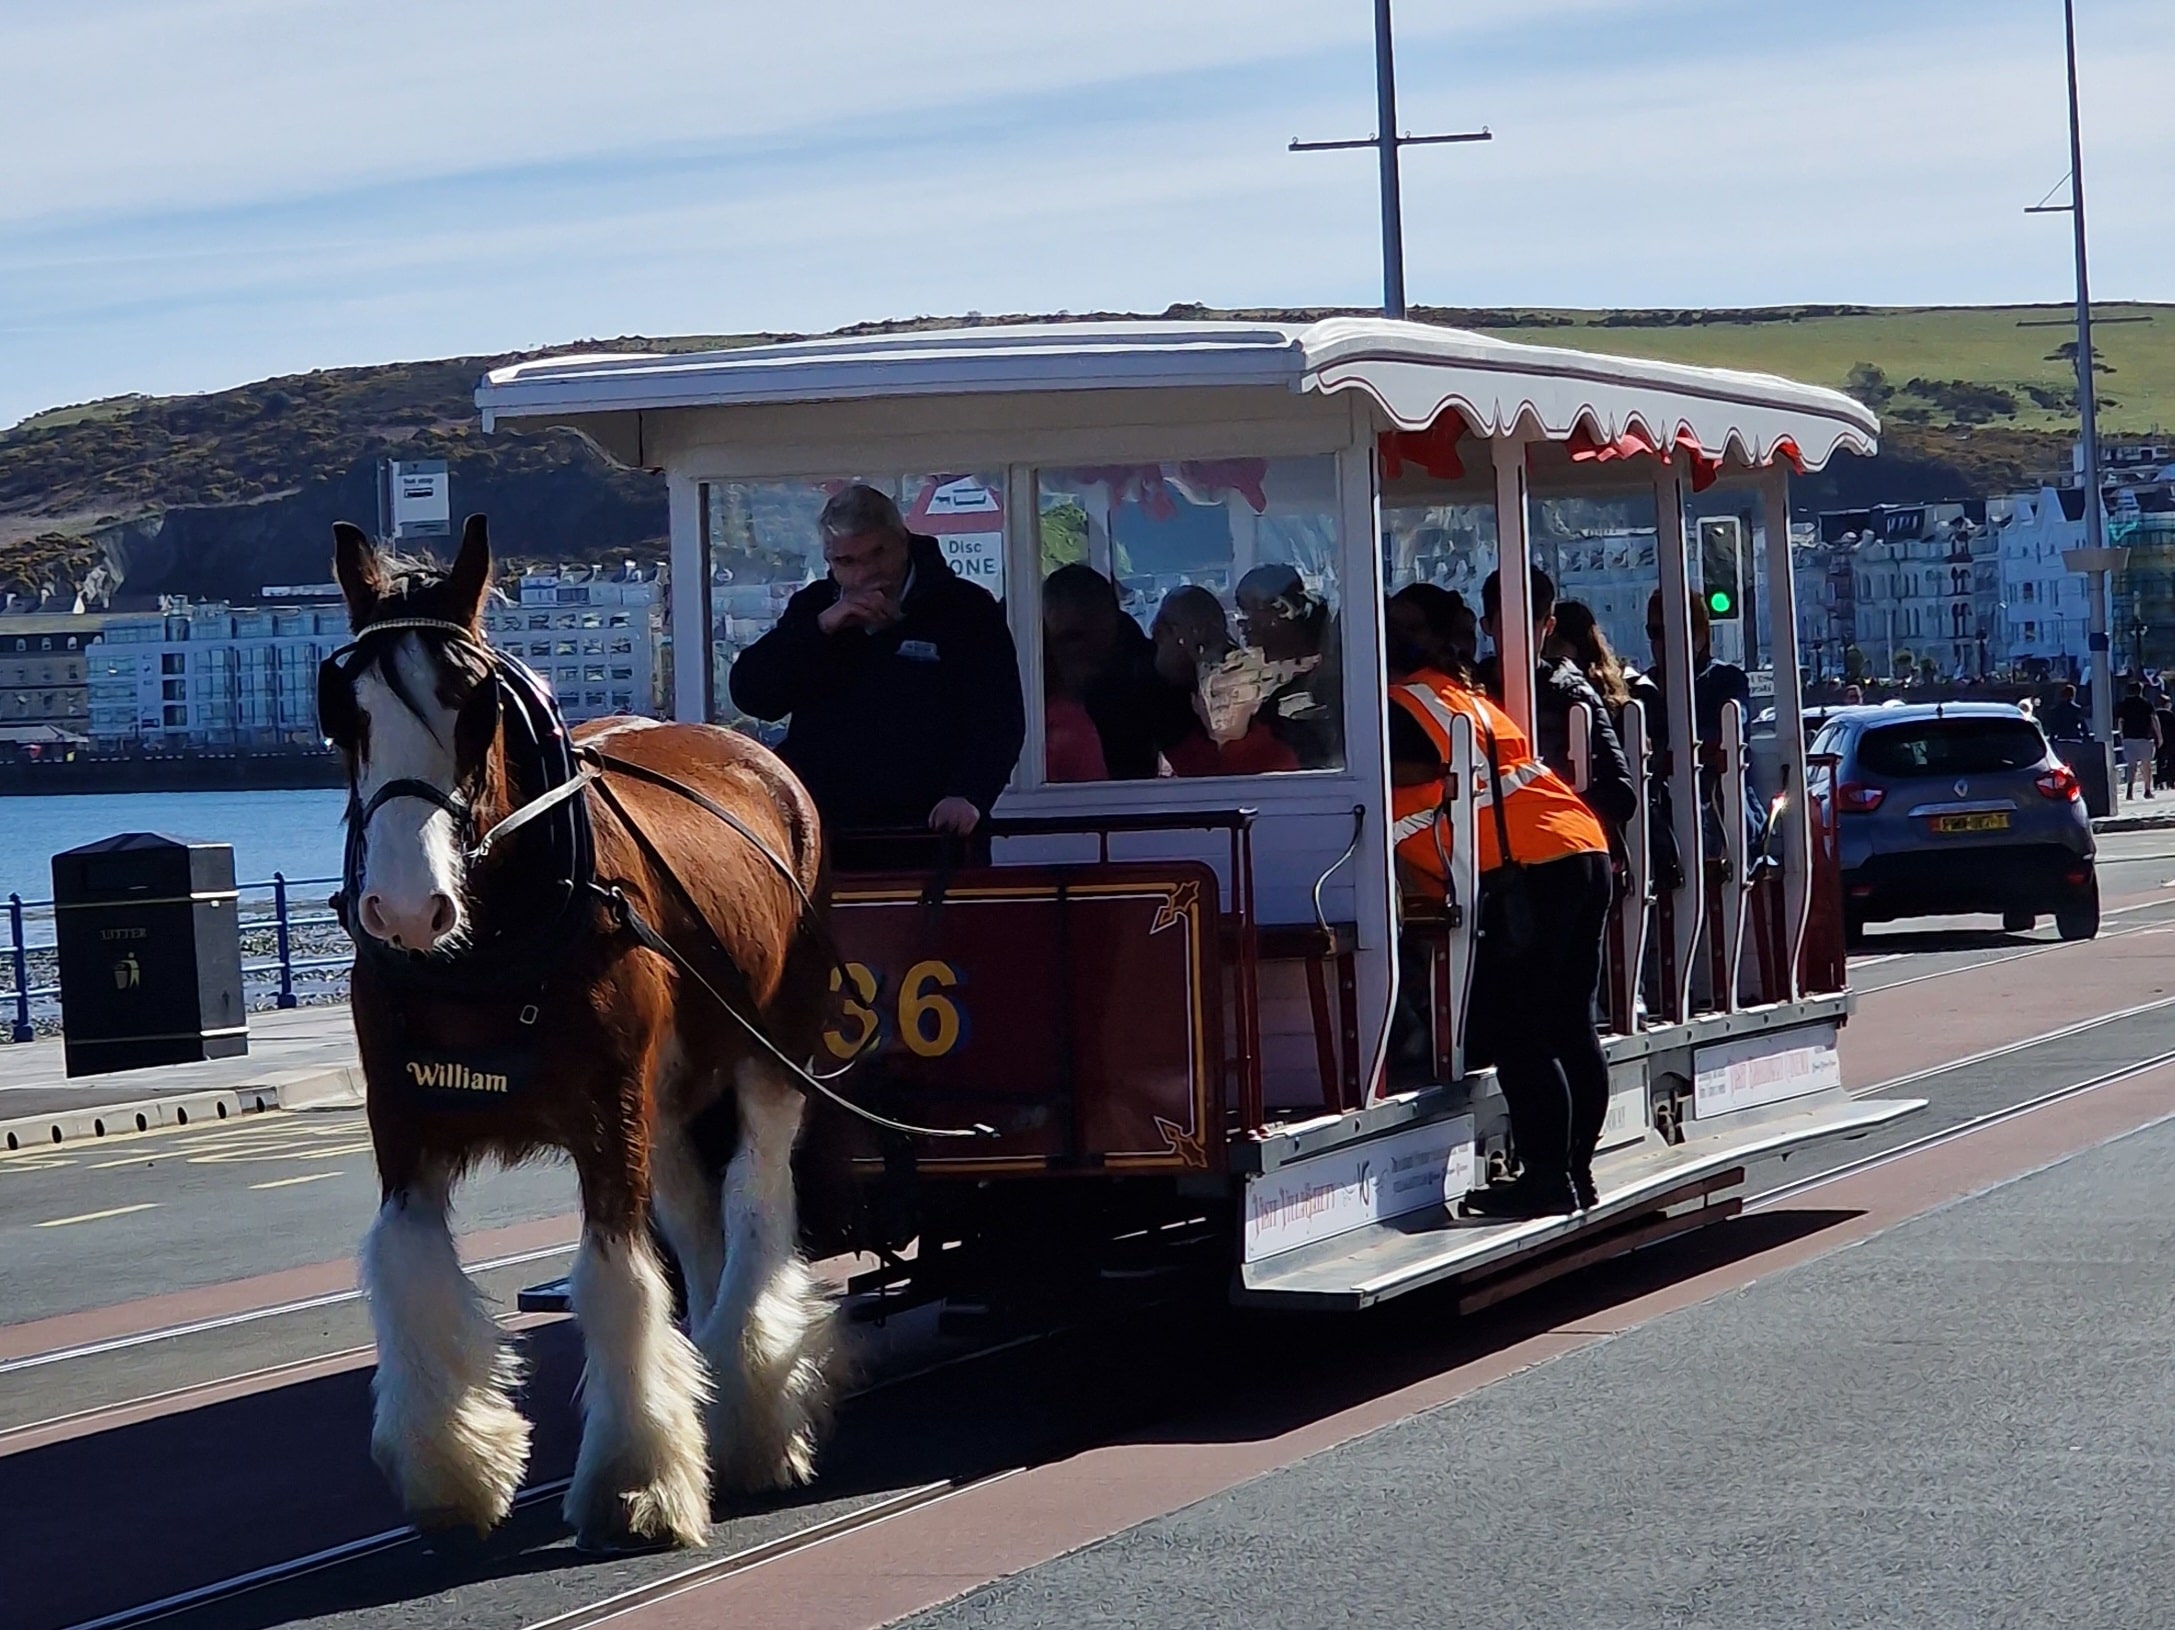 Horse Tramway on the Promenade